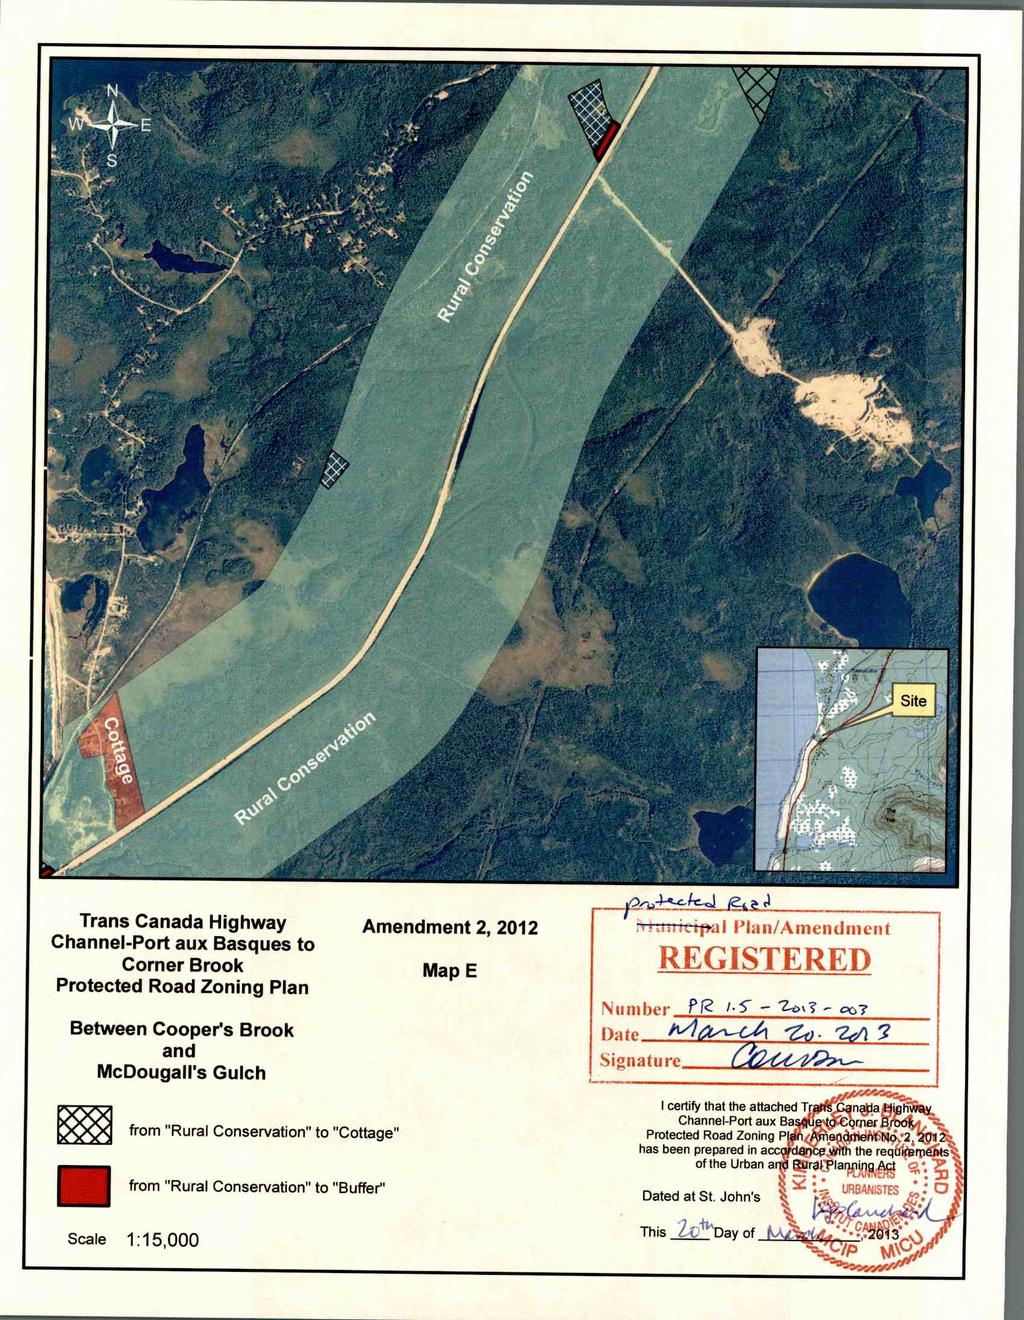 Trans Canada Highway Channel-Port aux Basques to Corner Brook Protected Road Zoning Plan Between Cooper's Brook and McDougall's Gulch Amendment 2, 2012 Map E WC Number PR /.